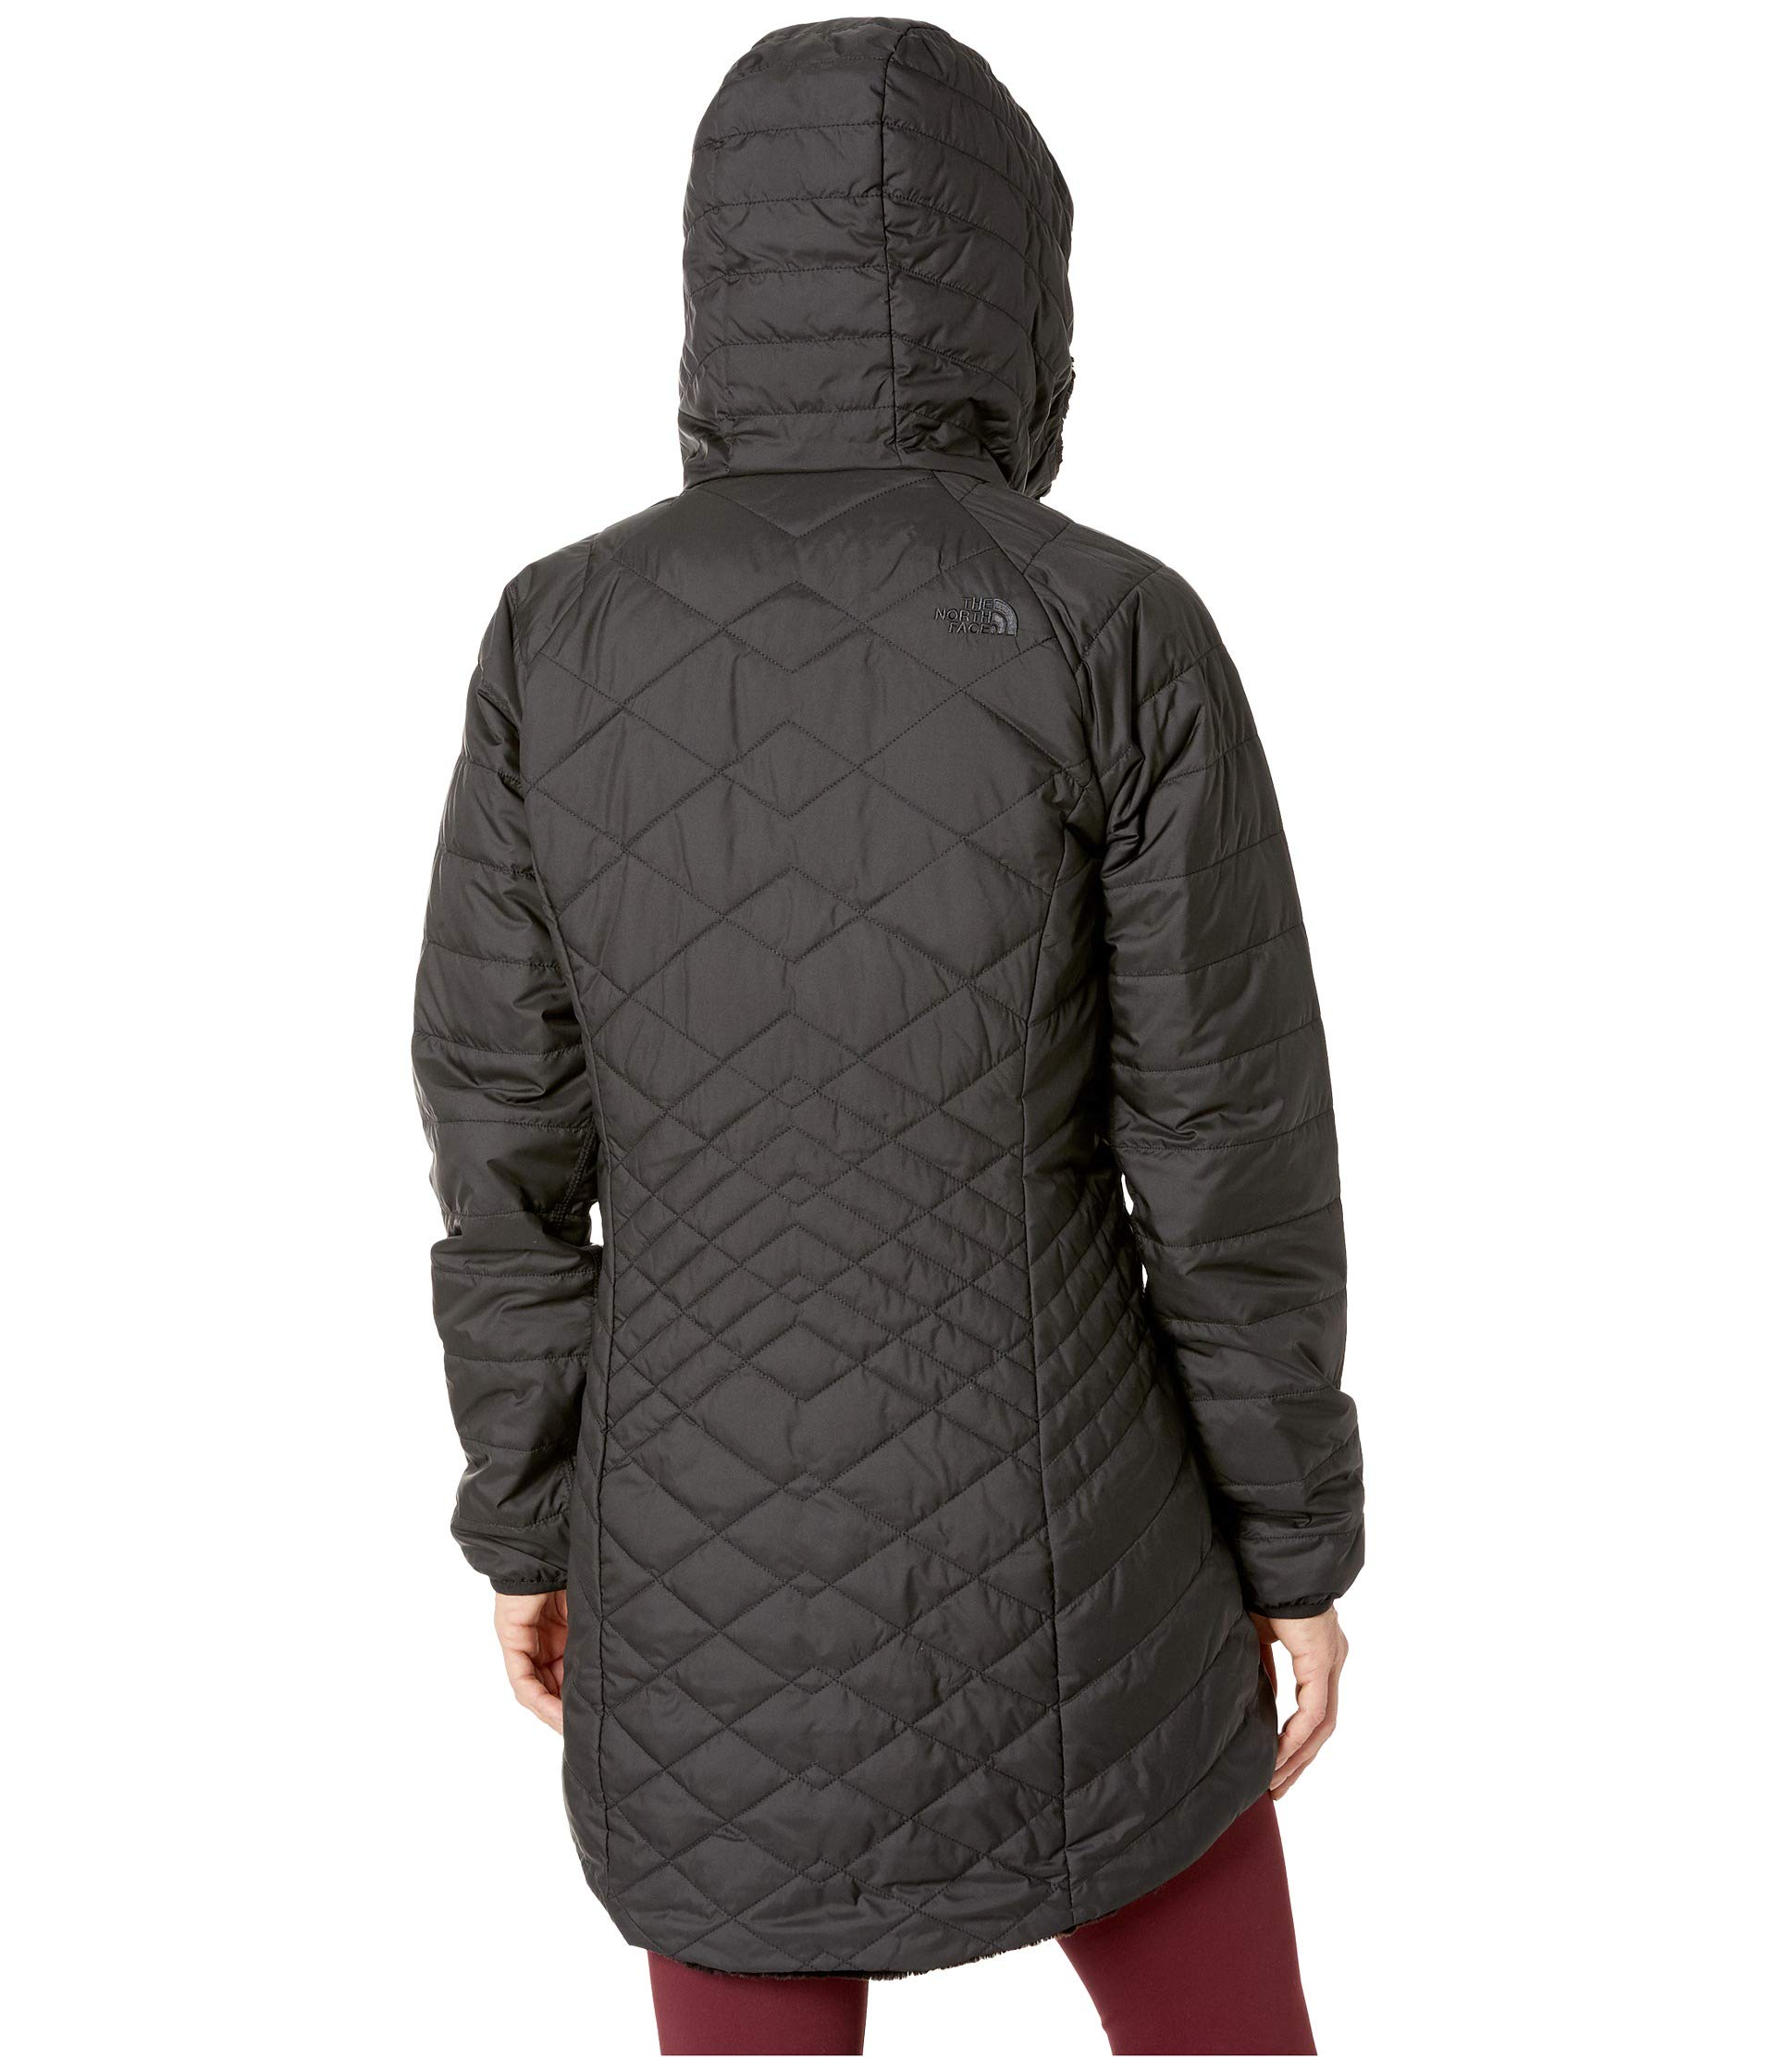 The North Face Mossbud Insulated Reversible Parka Jacket NF0A3MESH2G The North Face ktmart 5